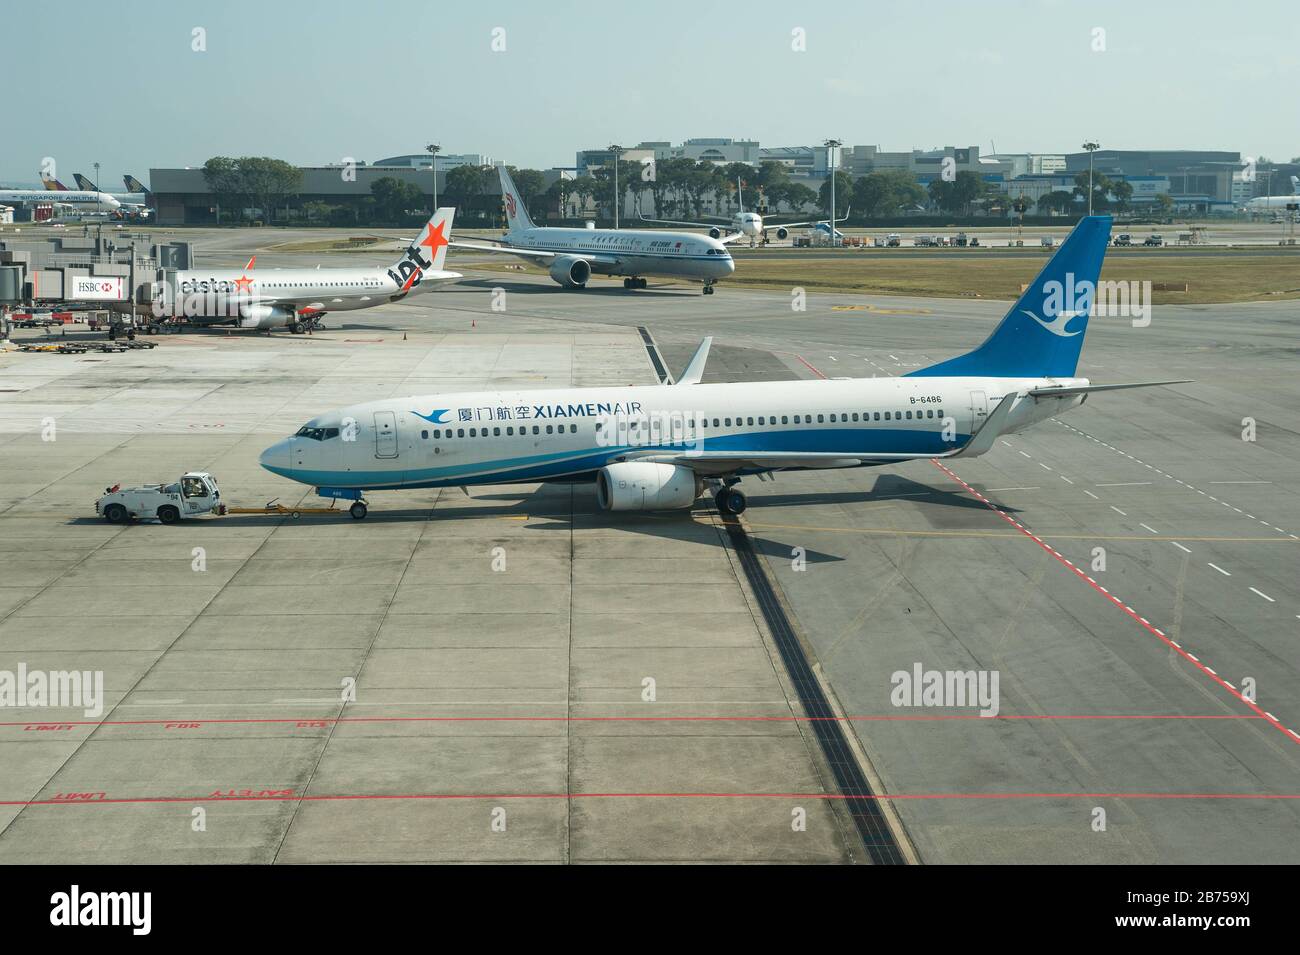 01.03.2019 - Singapore, Republic of Singapore, Asia - A Xiamen Air Boeing 737-800 passenger aircraft at Changi Airport. [automated translation] Stock Photo